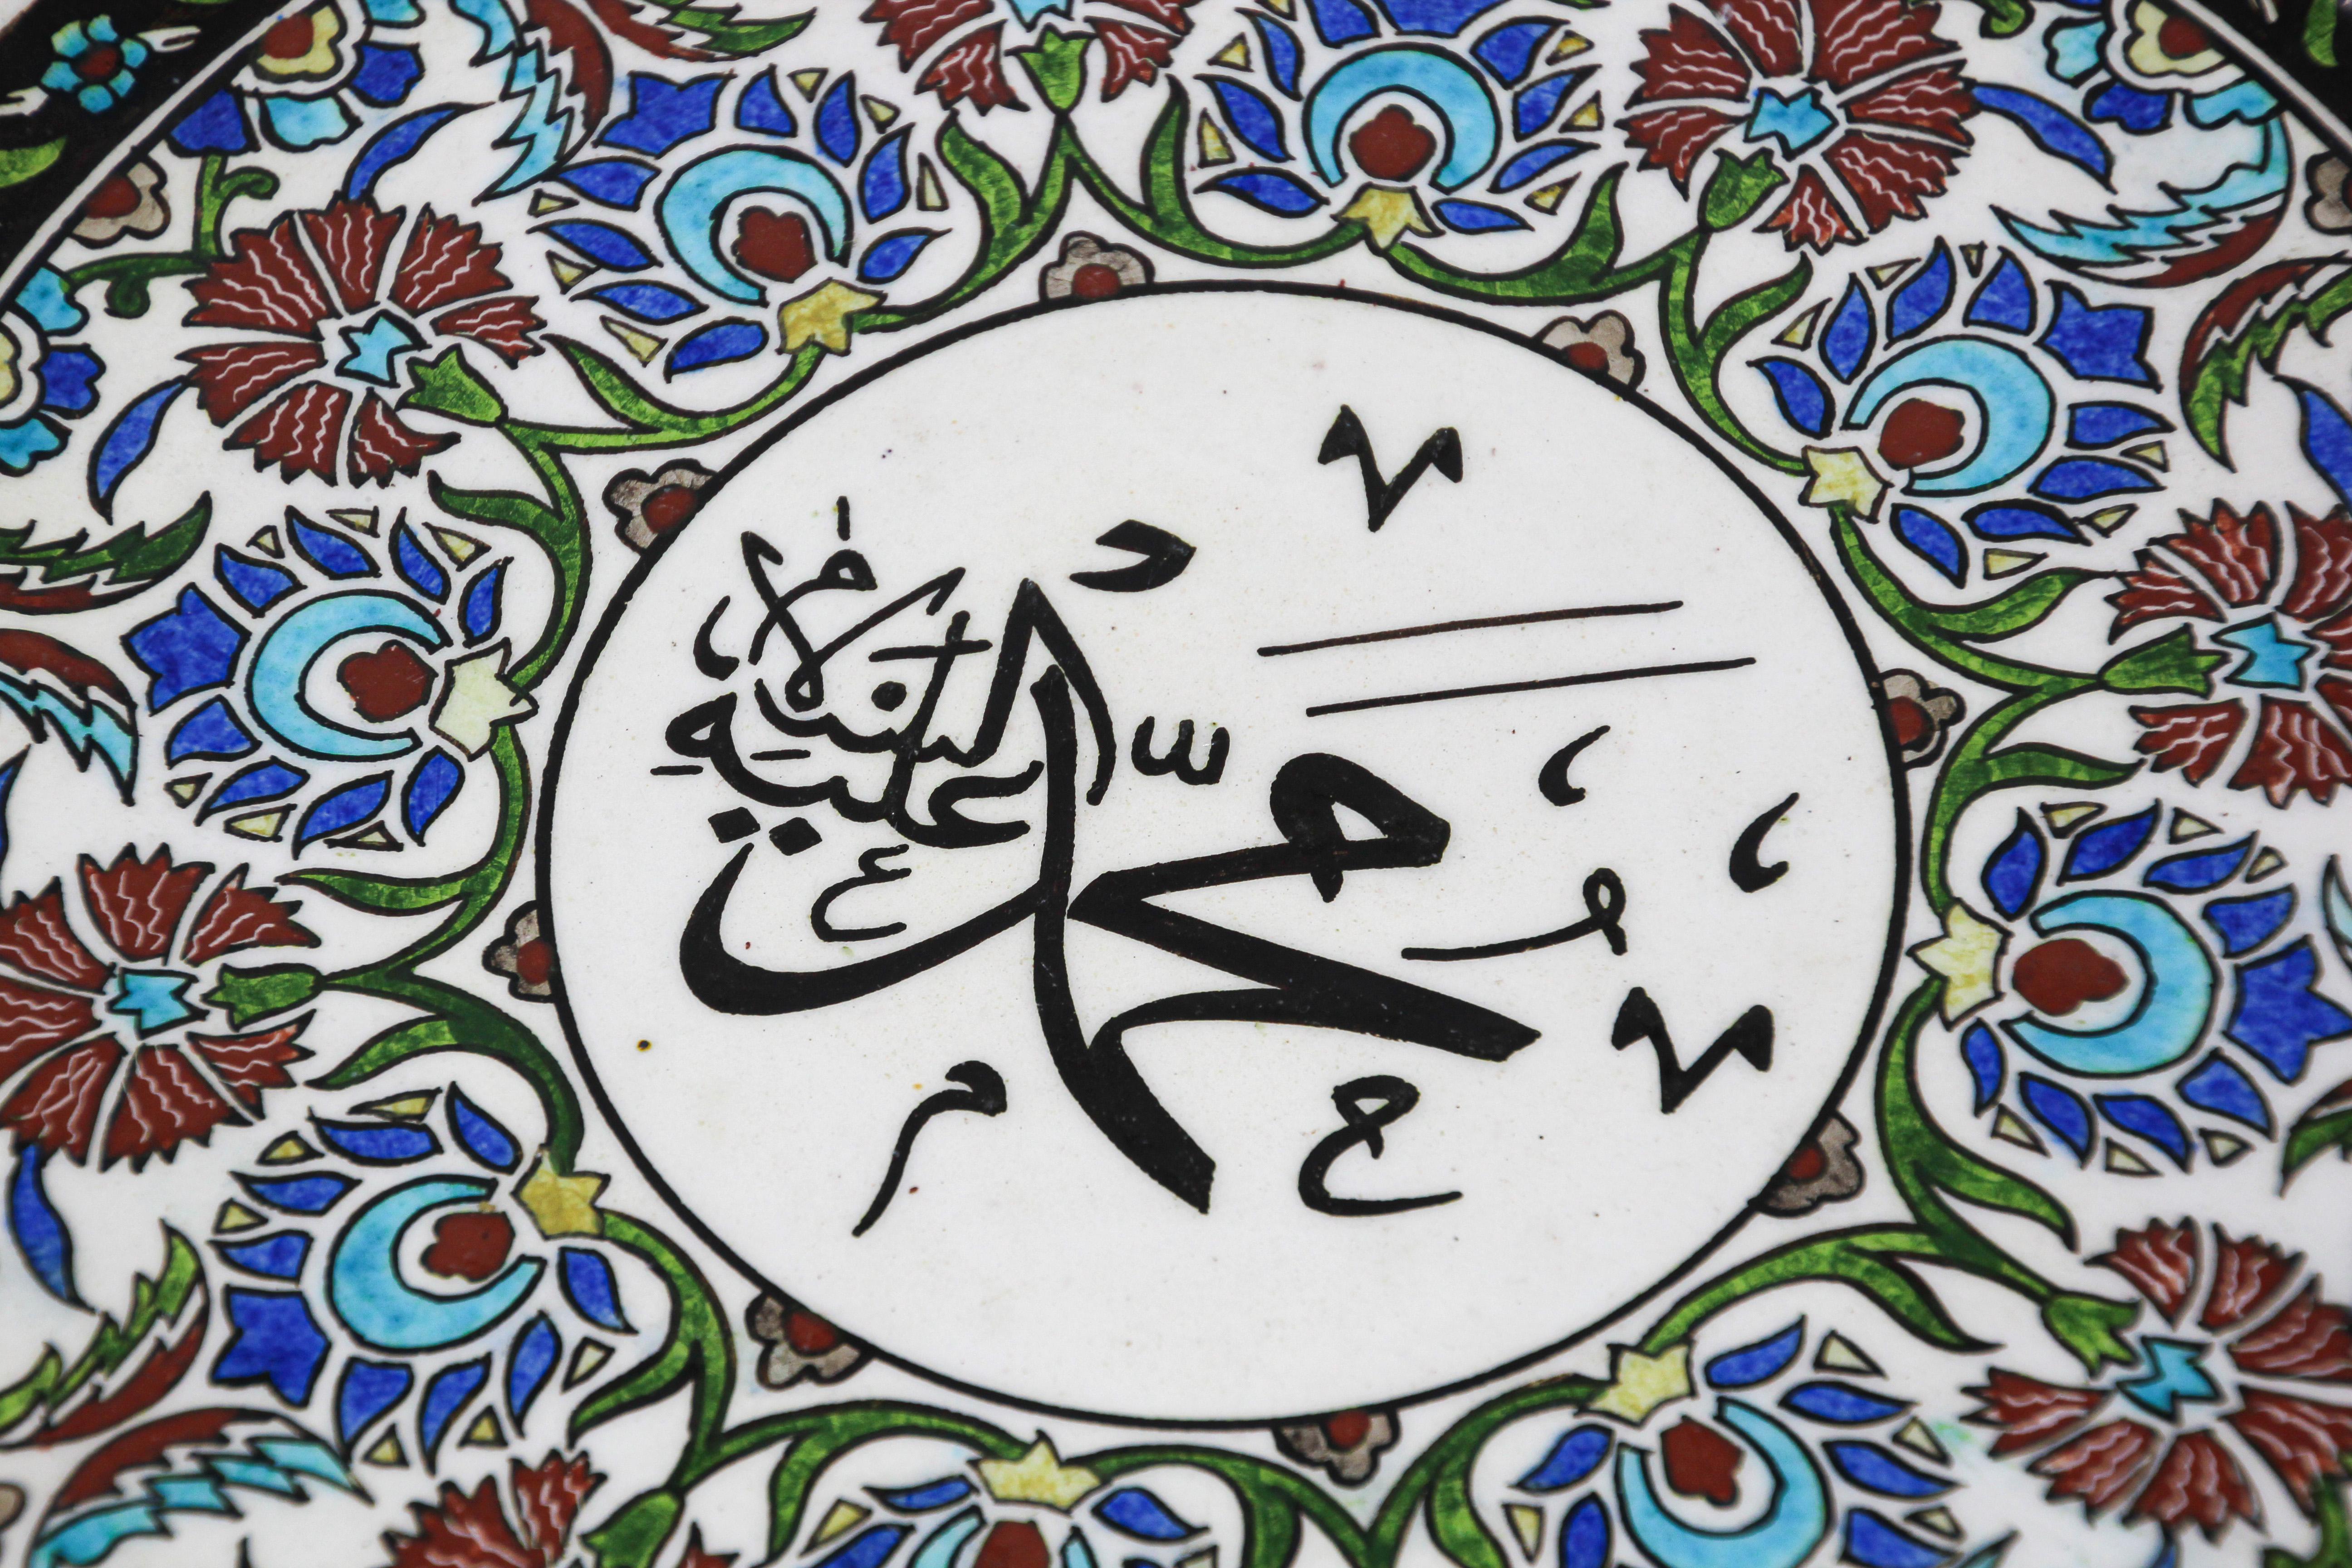 Hand painted and handcrafted Turkish ceramic wall decorative plate with polychrome Ottoman floral design and Islamic calligraphy writing in the center.
This is an intricately, hand painted plate that was made in Turkey.
Turkey is famous for its